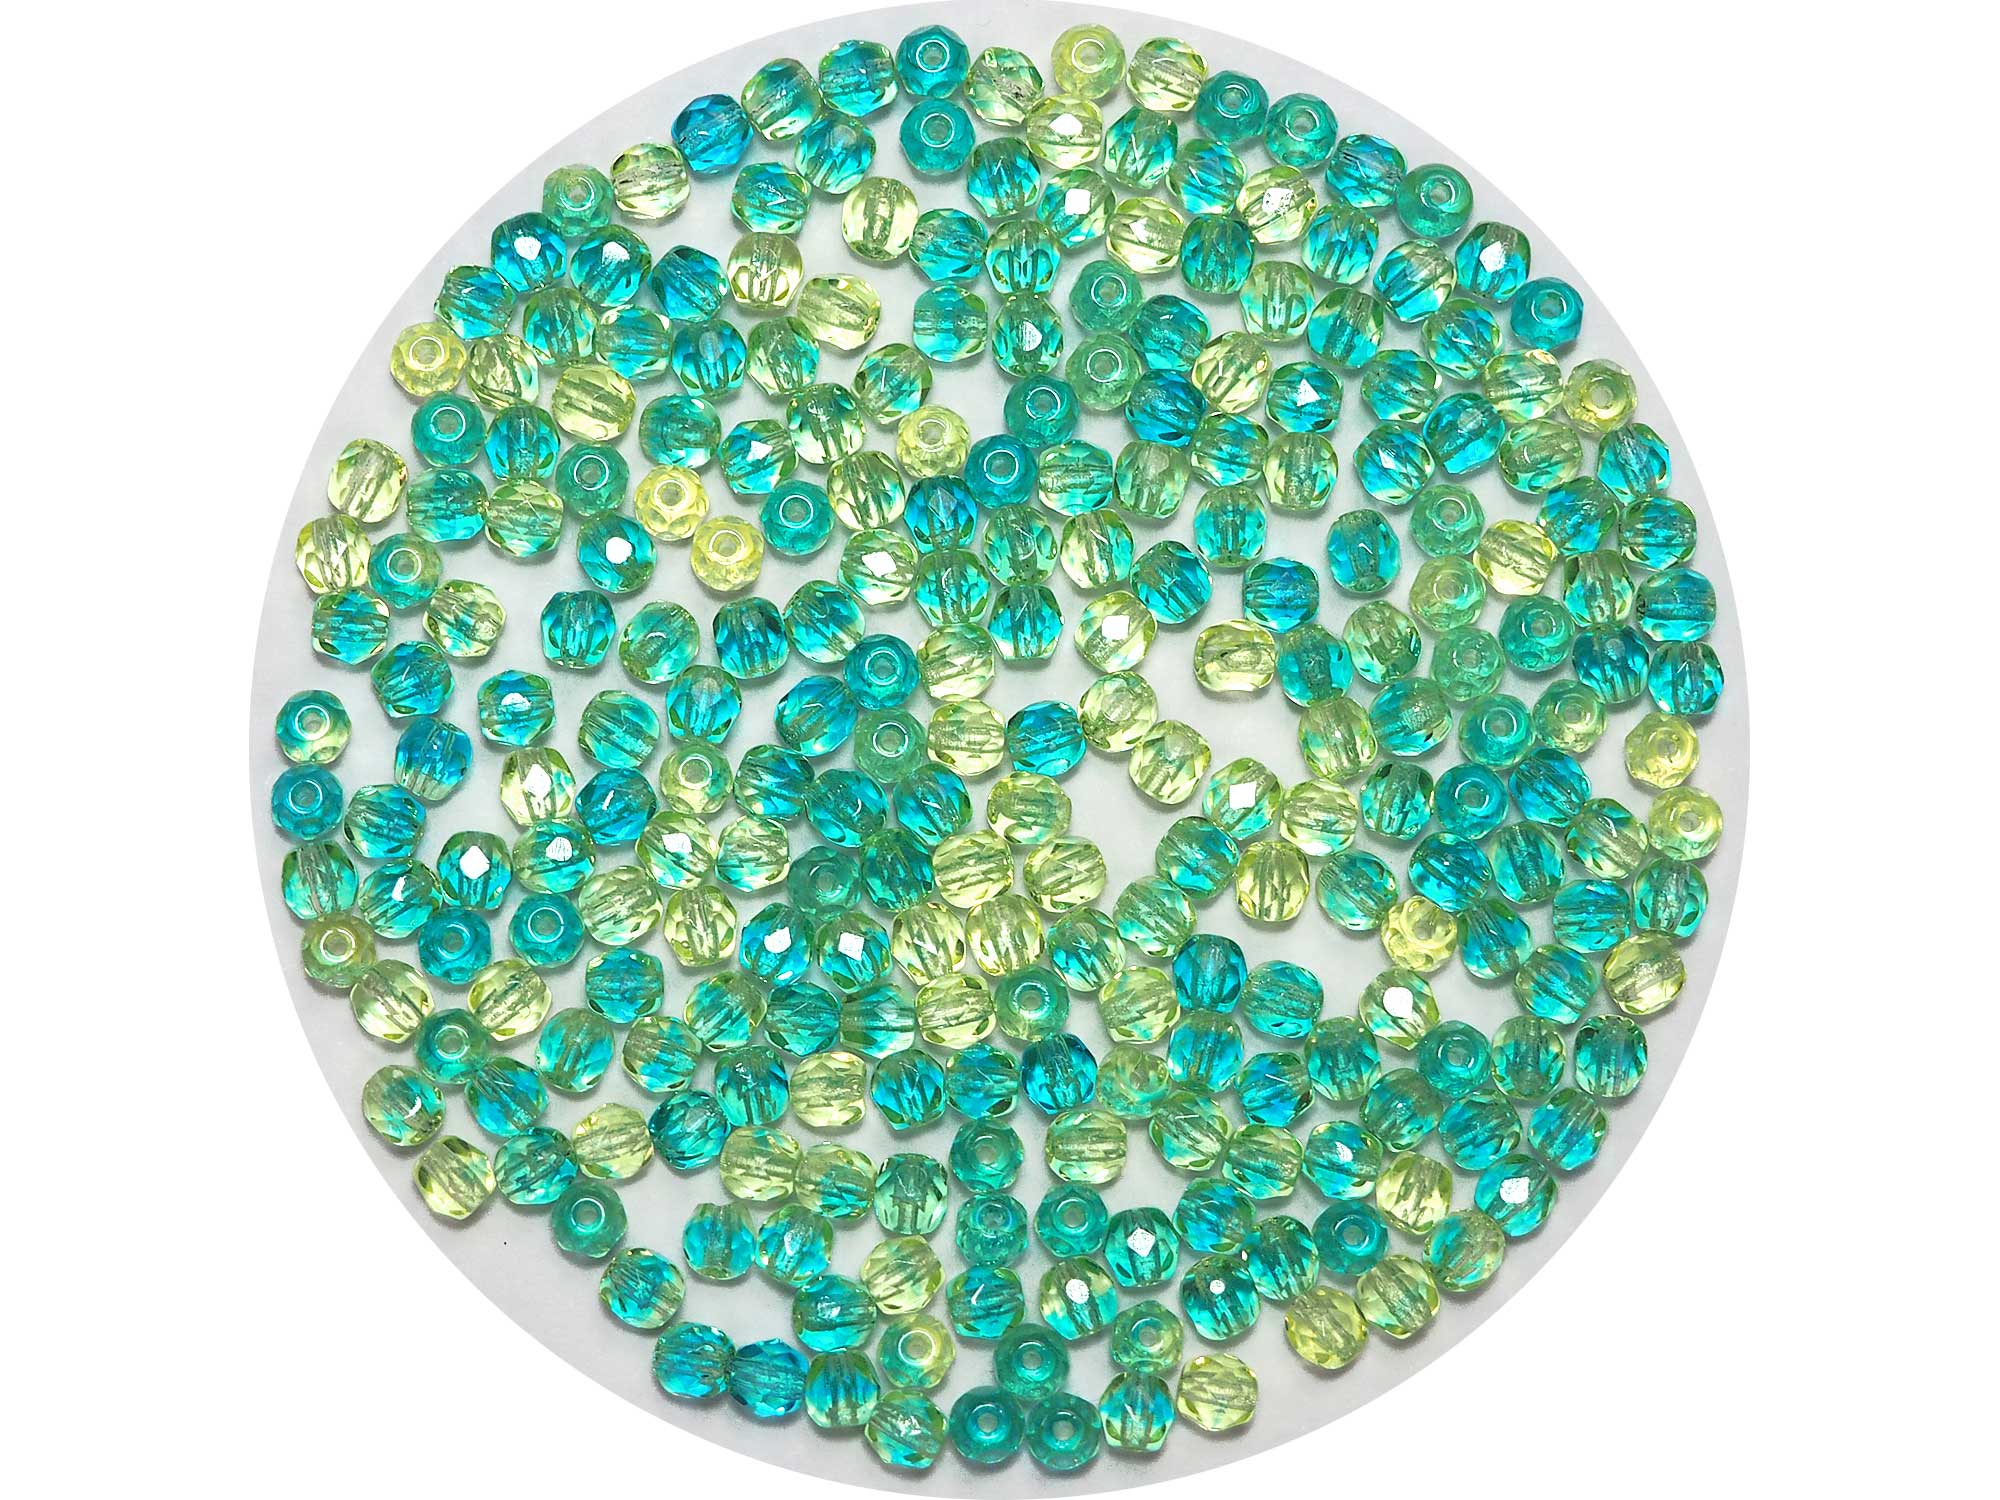 Neon Yellow and Teal Green 2-tone combination, Czech Fire Polished Round Faceted Glass Beads, 4mm 100pcs, P454